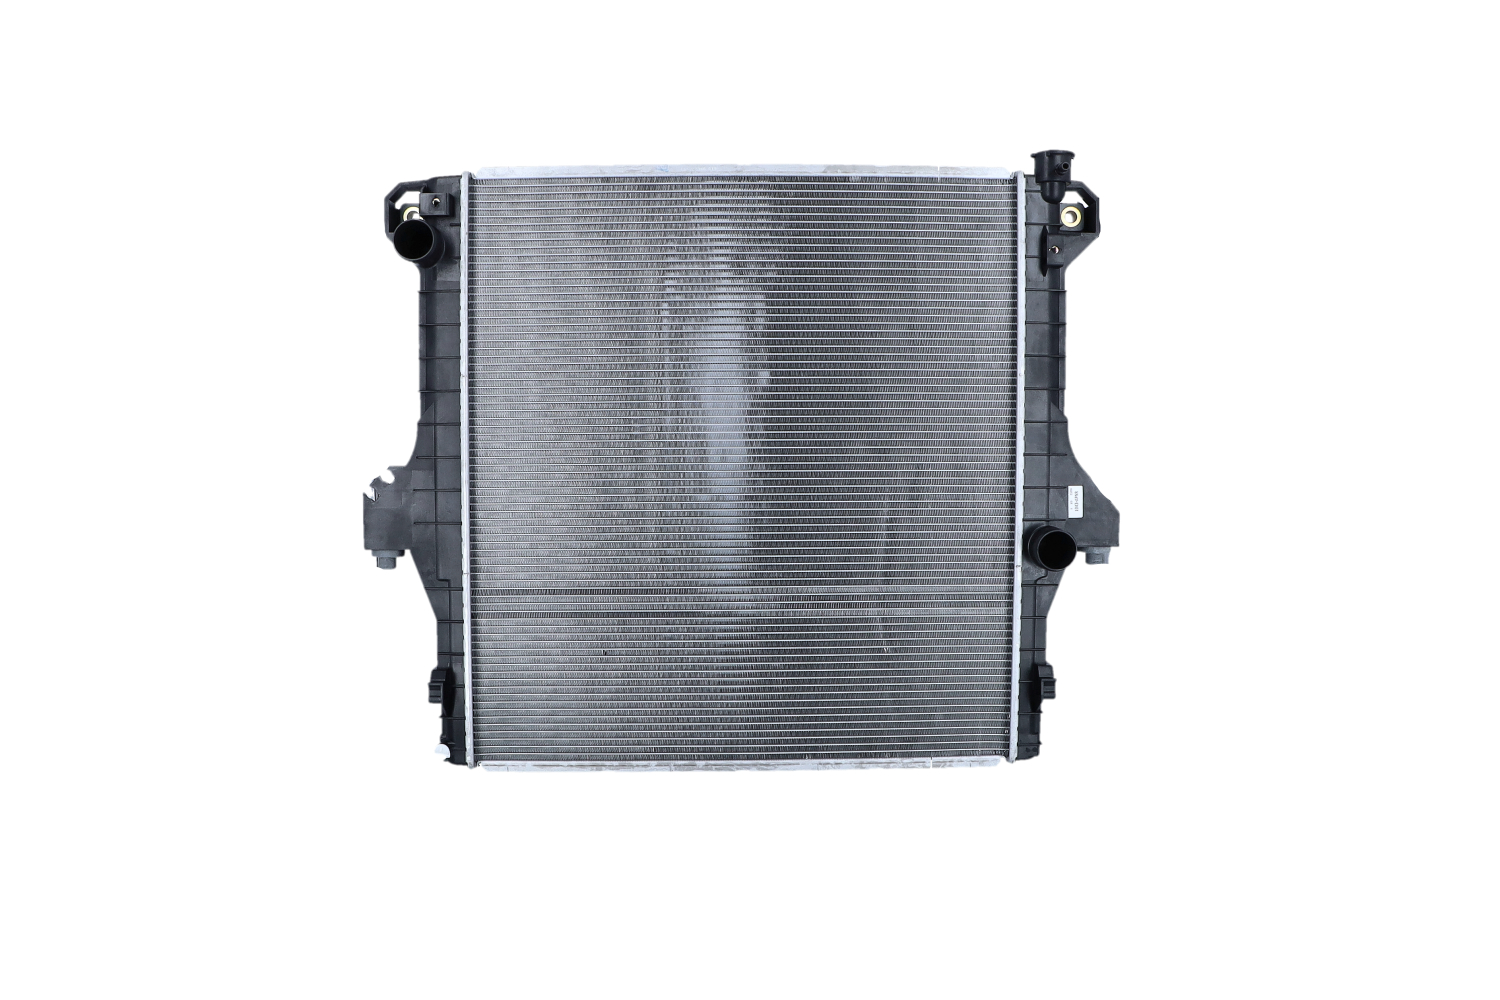 56025 NRF Radiators DODGE Aluminium, 738 x 684 x 36 mm, with mounting parts, Brazed cooling fins